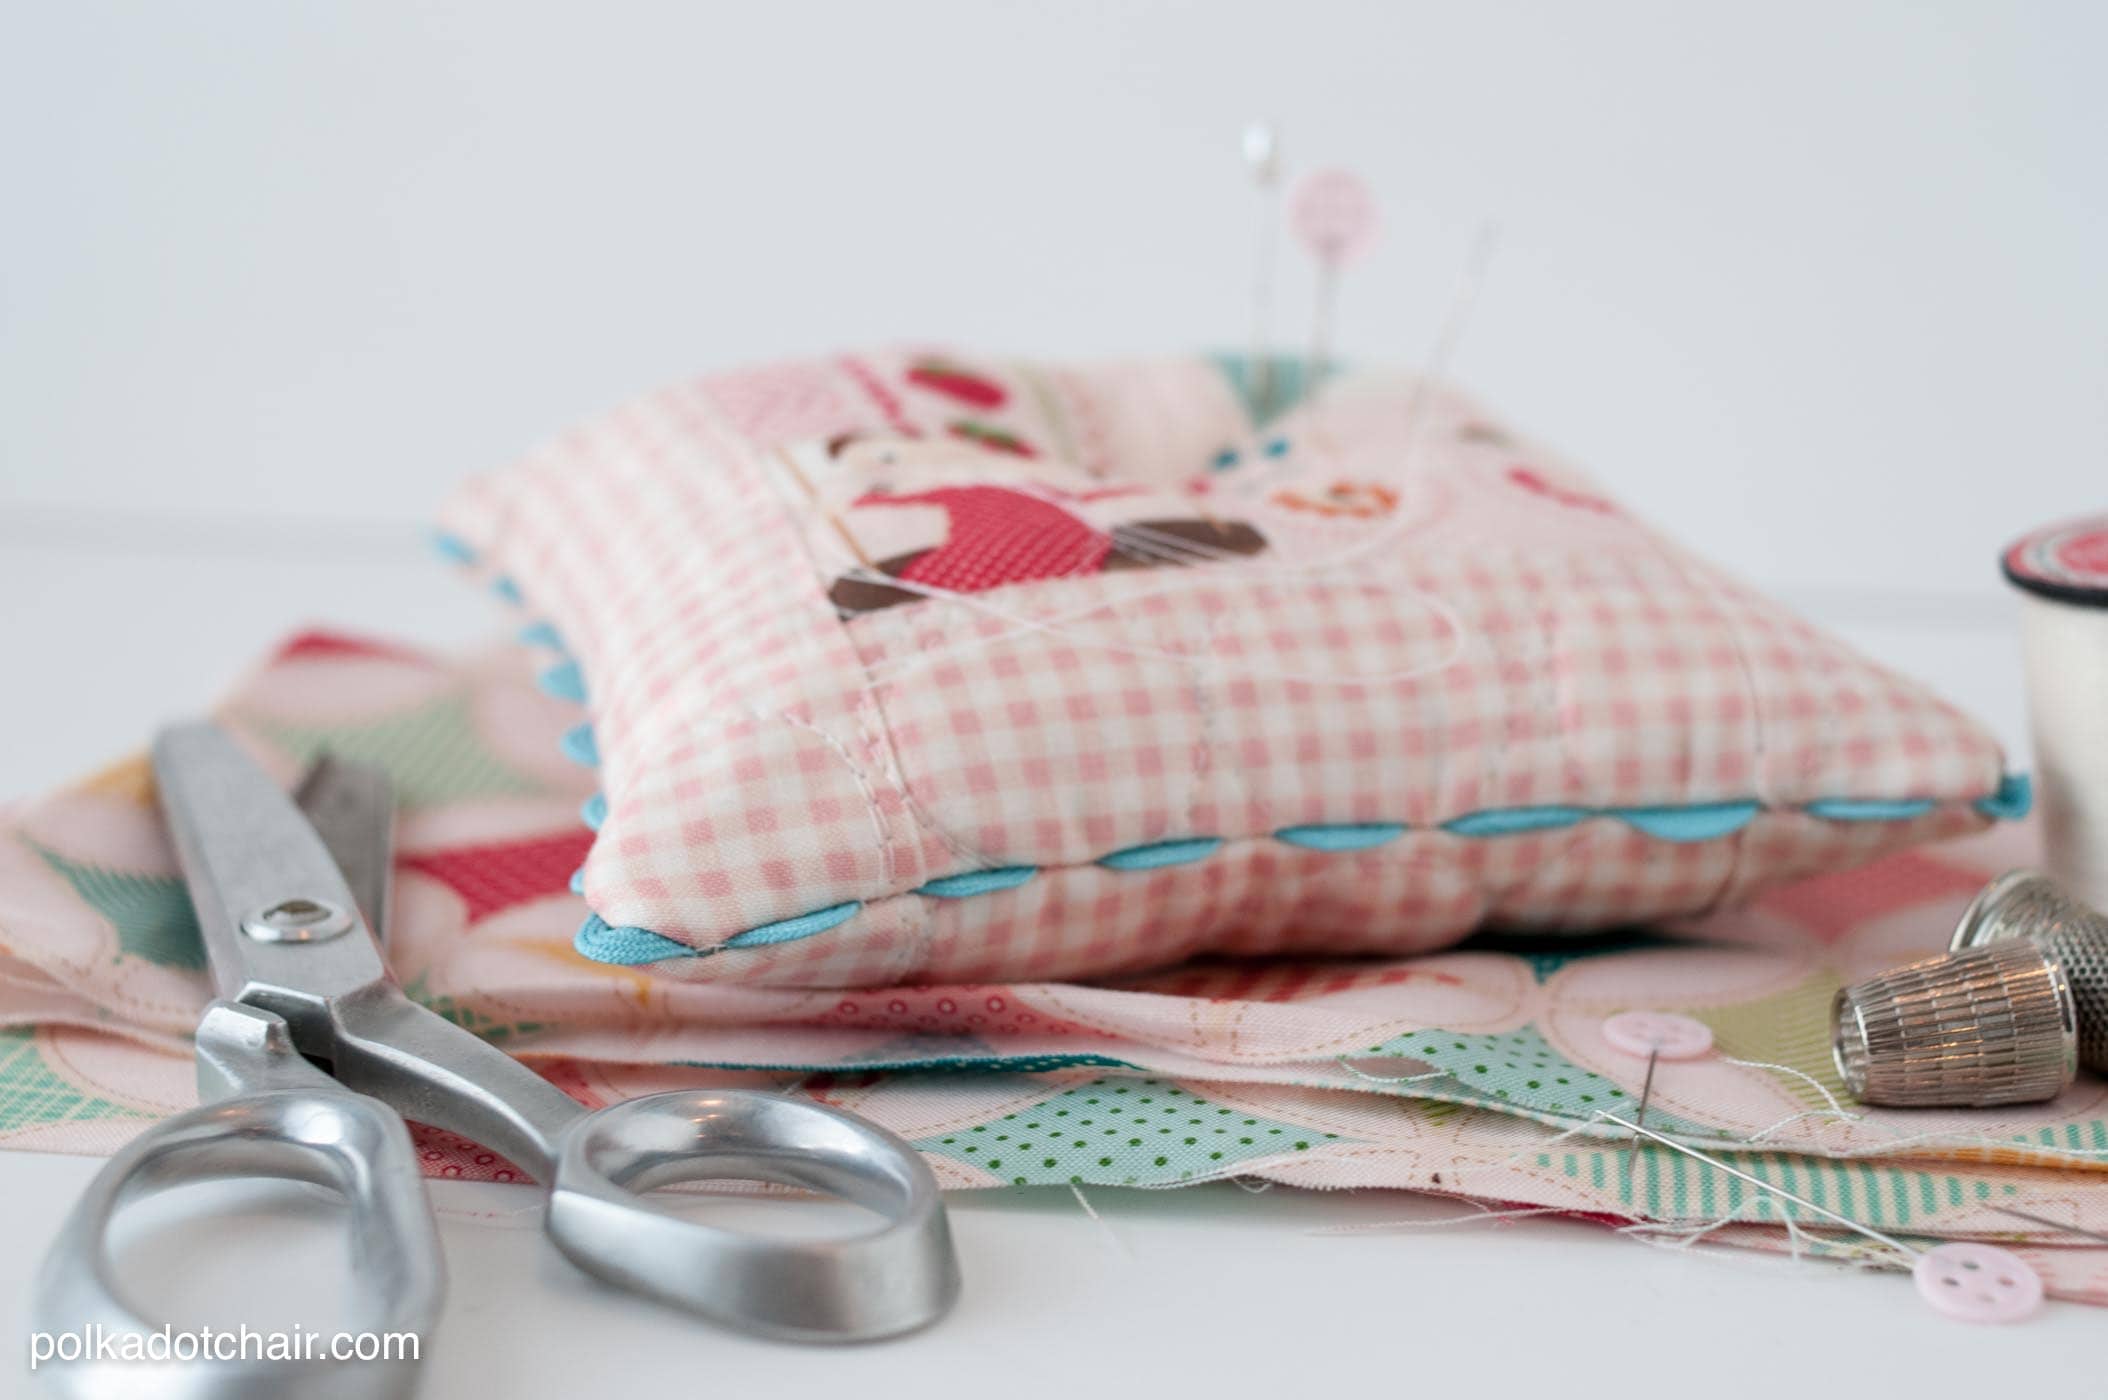 Free sewing pattern for a cute mini patchwork pincushion